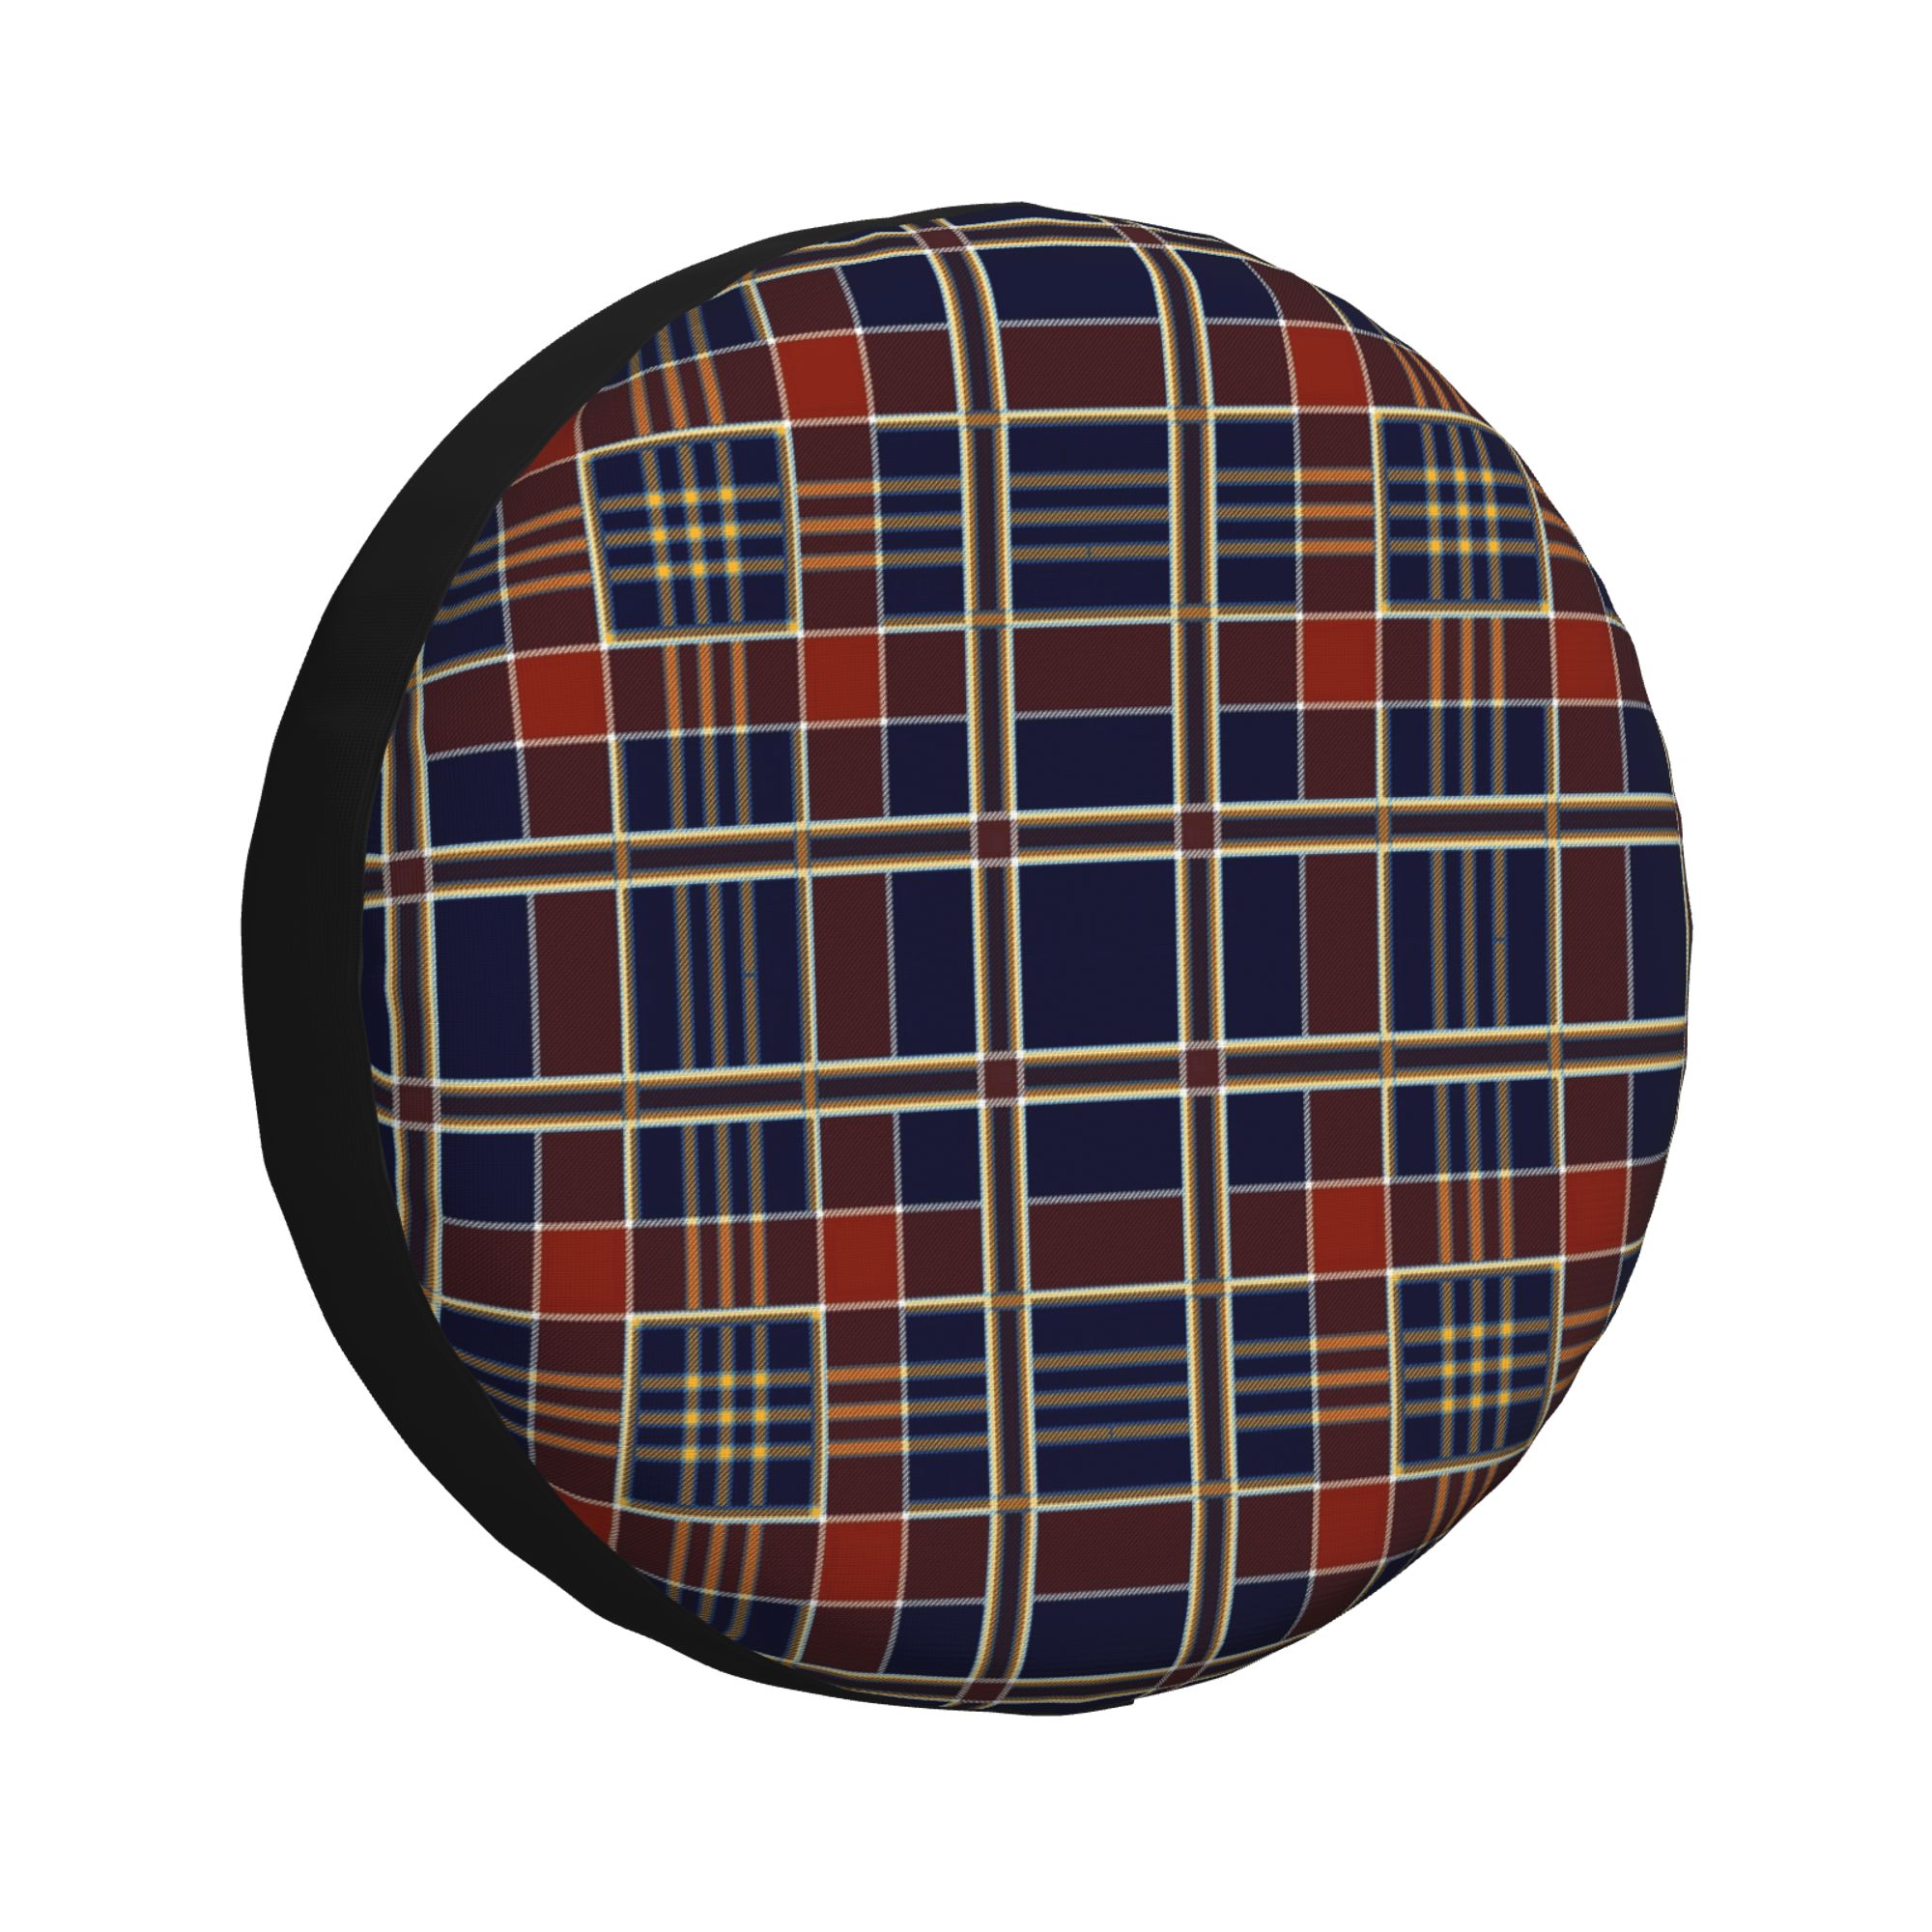 XMXY Plaid Tartan Scottish Spare Tire Cover，Universal Waterproof Cover for  Jeep RV Tire Wheel Protection 15 inch